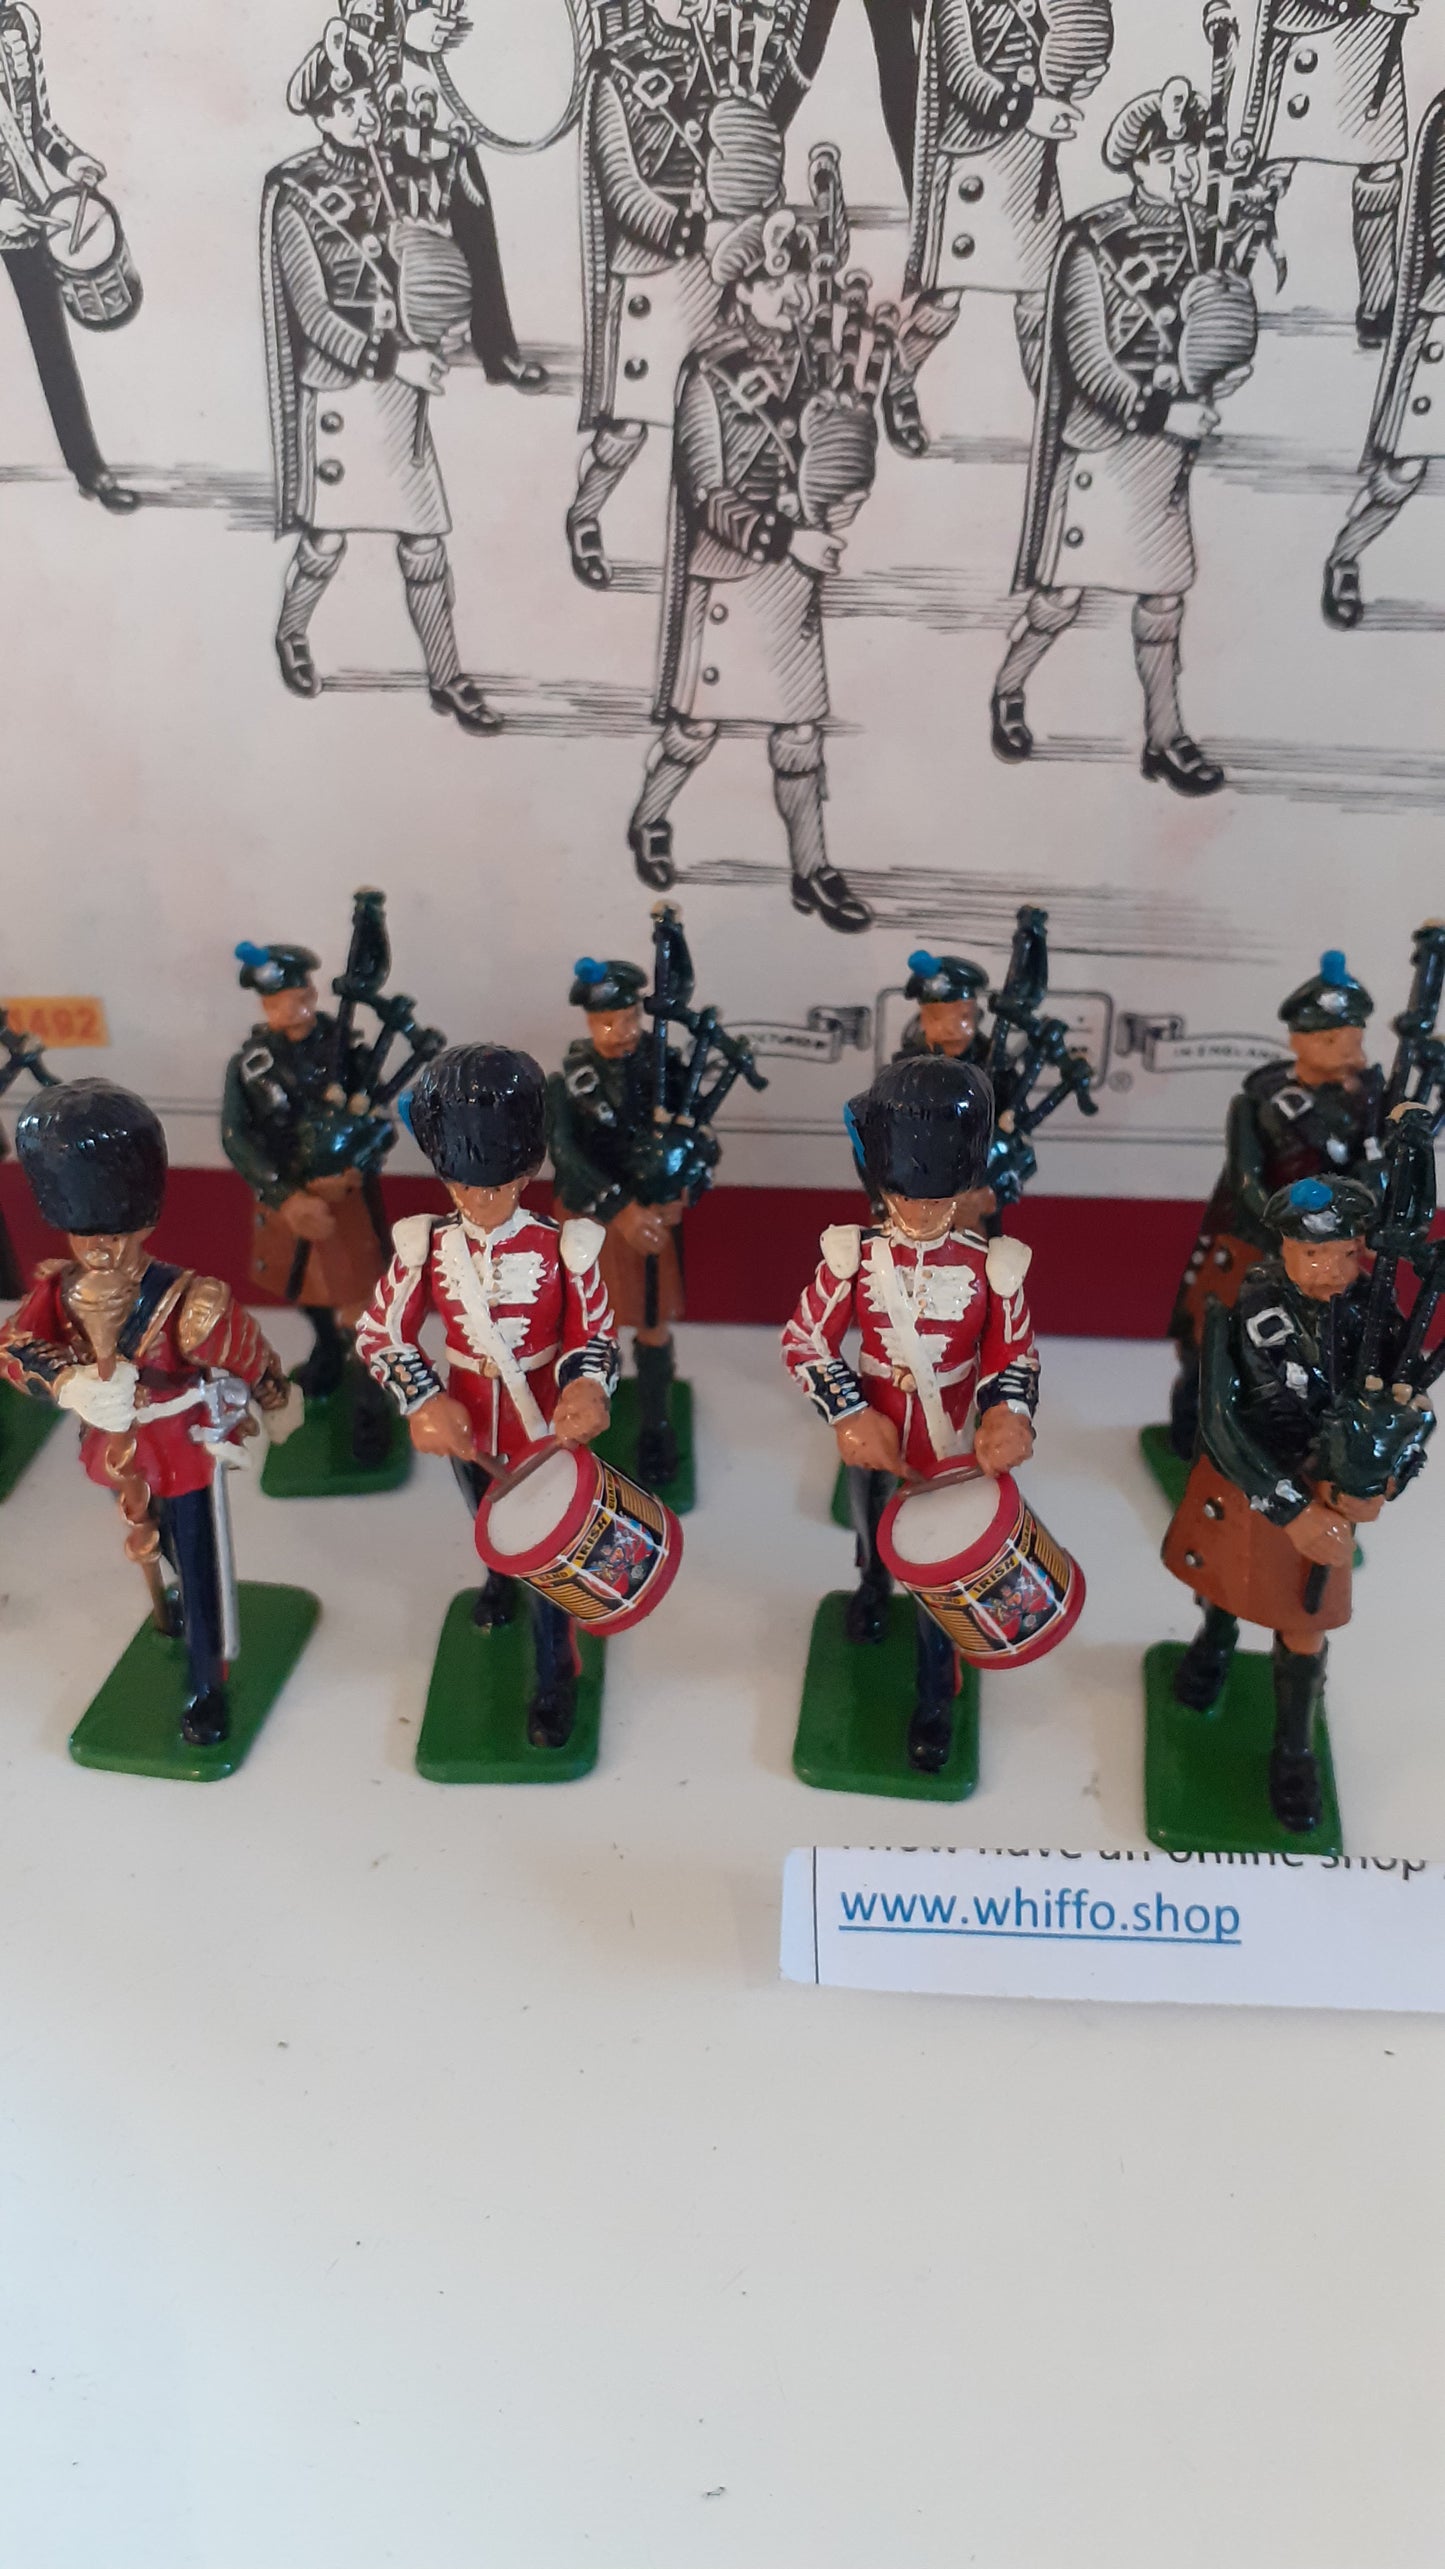 Britains 00316 2000 Limited edition Pipes Drums Irish Guards boxed 1:32 S4